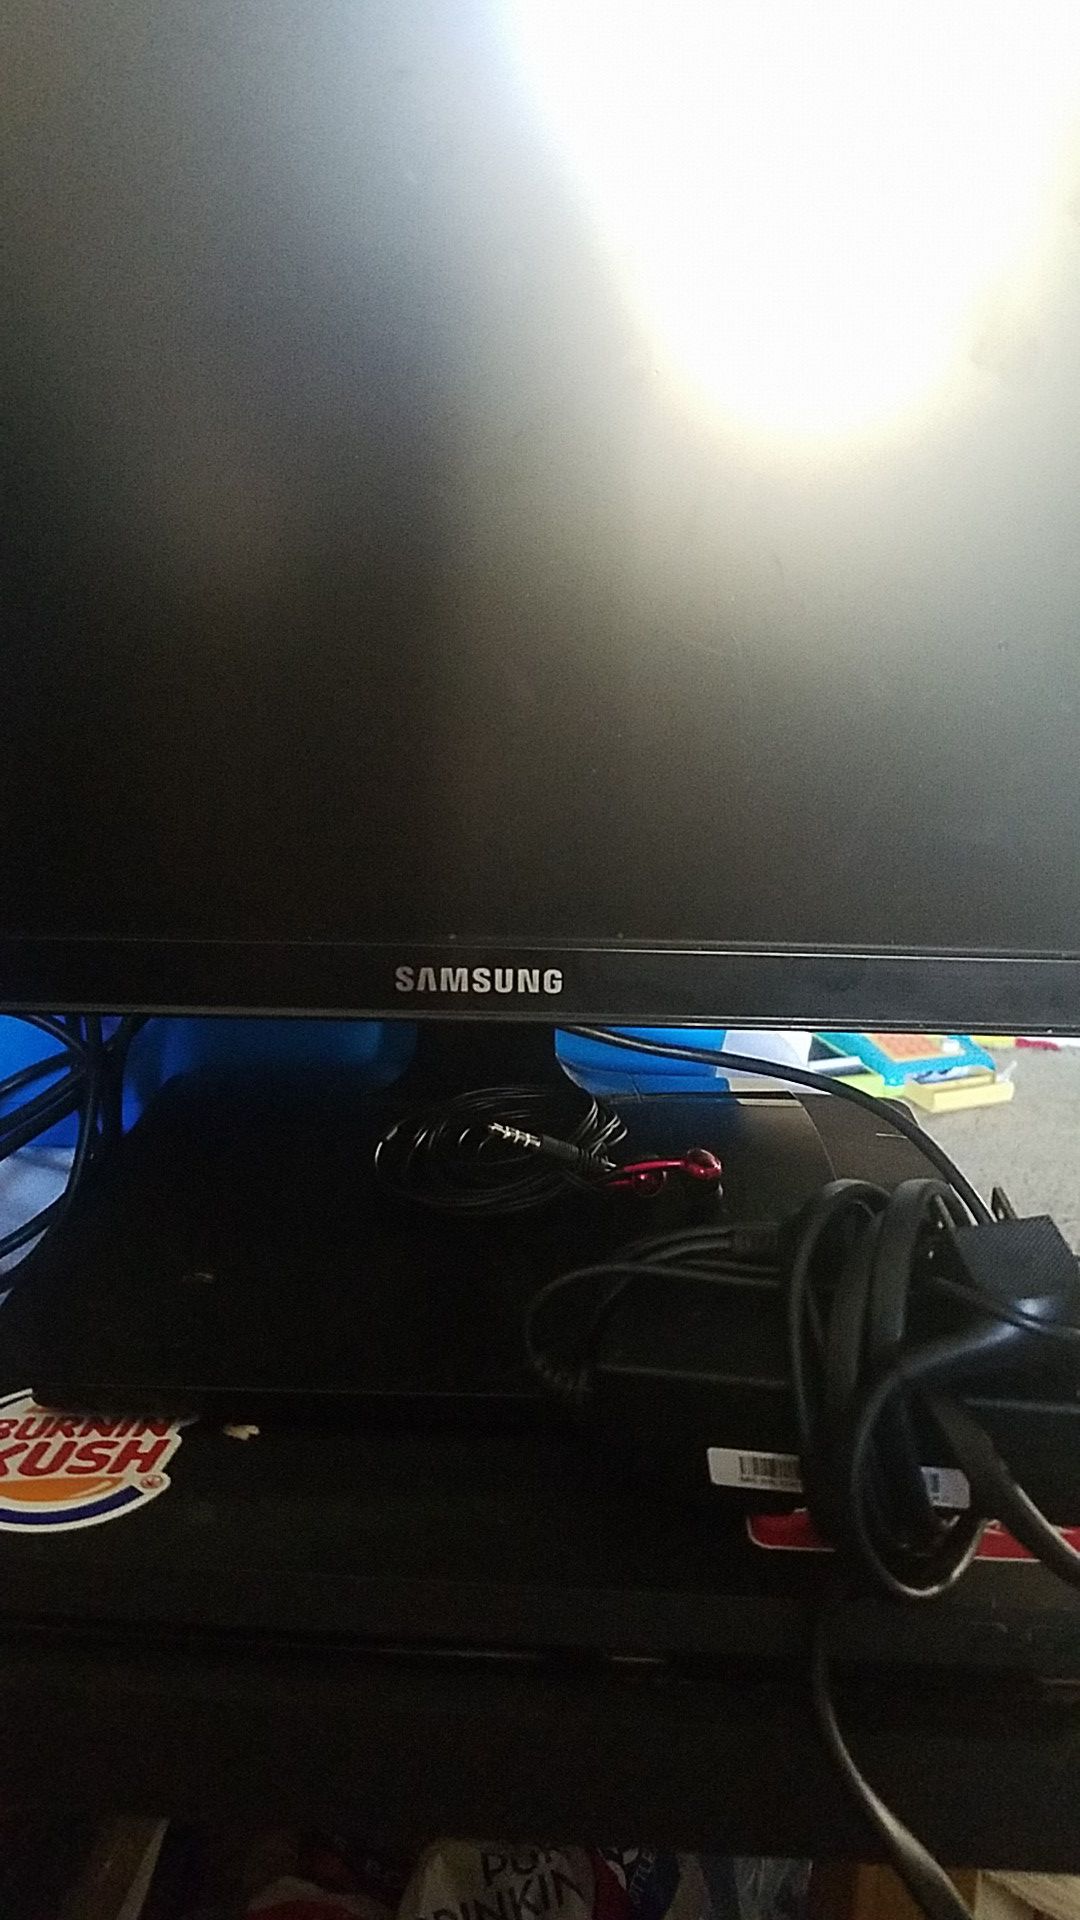 Ps4 slim 500 GB with samsung monitor.